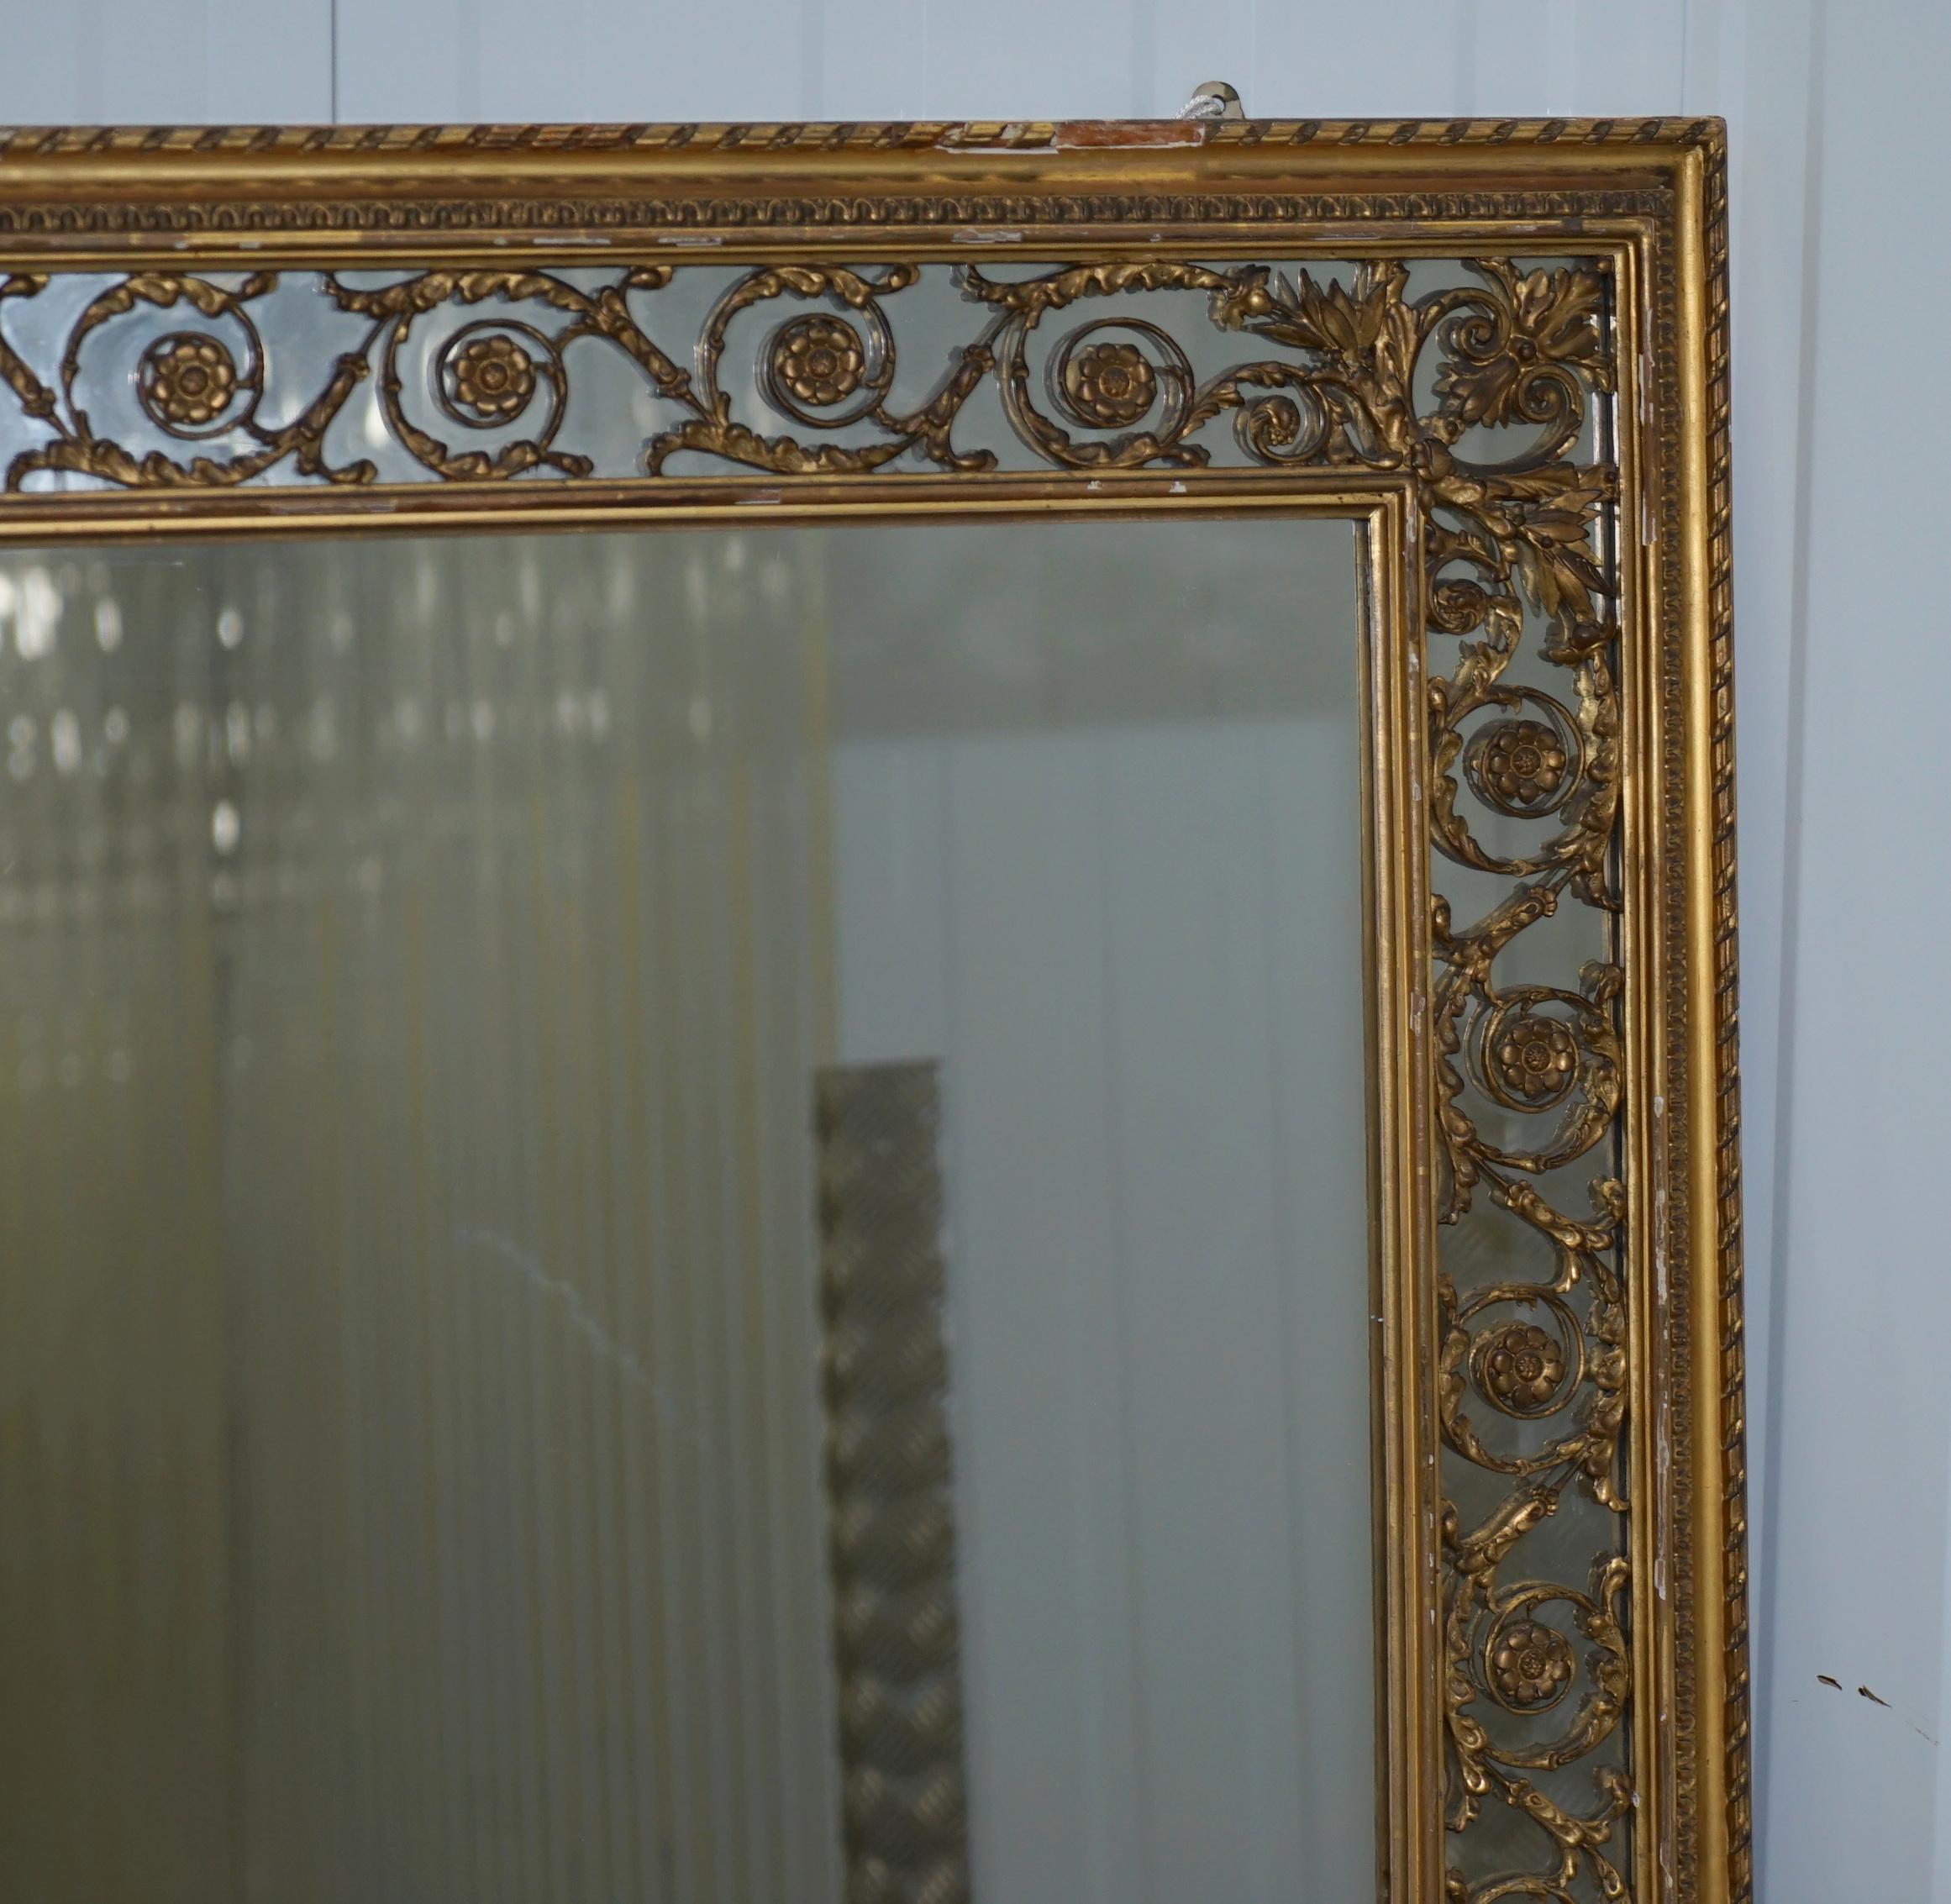 We are delighted to offer for sale this lovely early Victorian circa 1860 Charles Nosotti over mantle mirror with original mercury plate glass

A large and substantial Victorian gilt framed over mantel mirror made by Charles Nosotti, circa 1860,